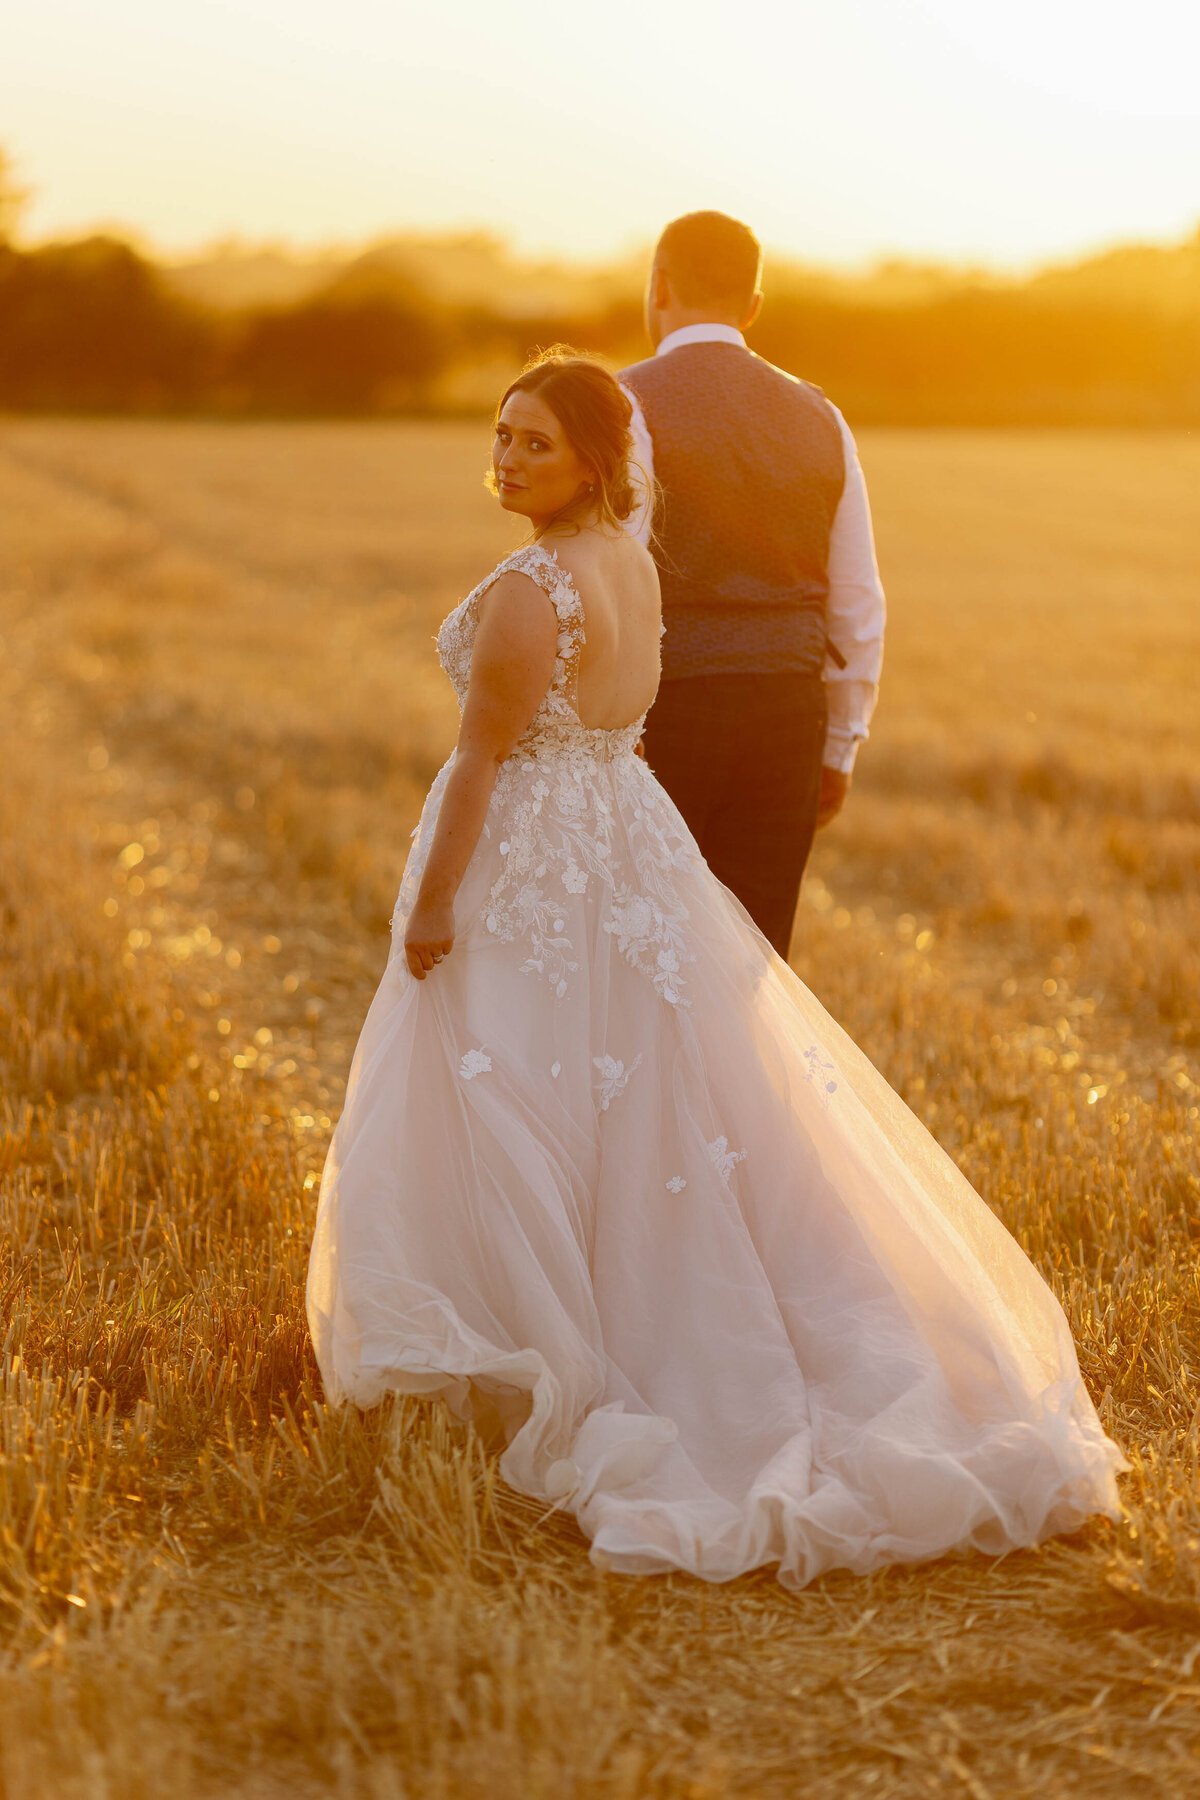 Bride looking back at camera as she walks in a corn field during golden hour